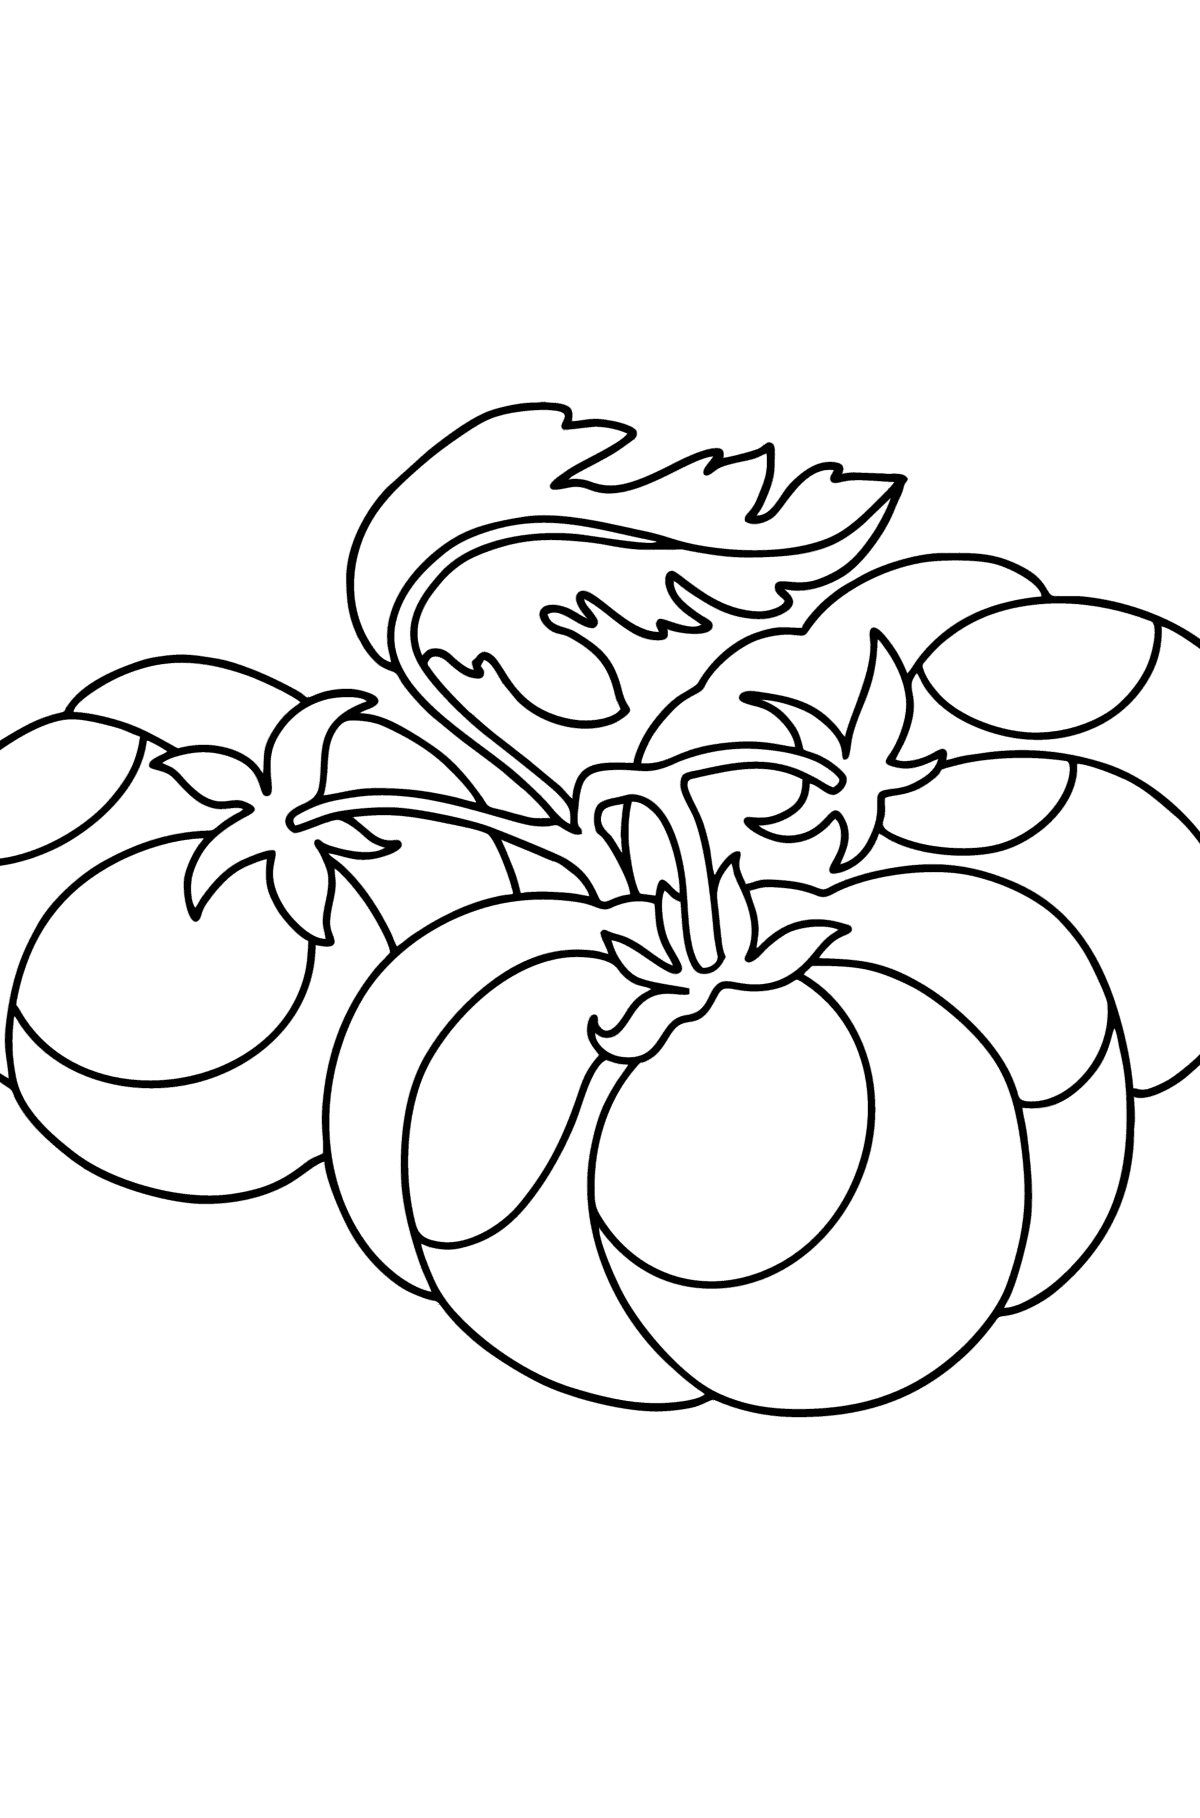 Large tomatoes сoloring page - Coloring Pages for Kids